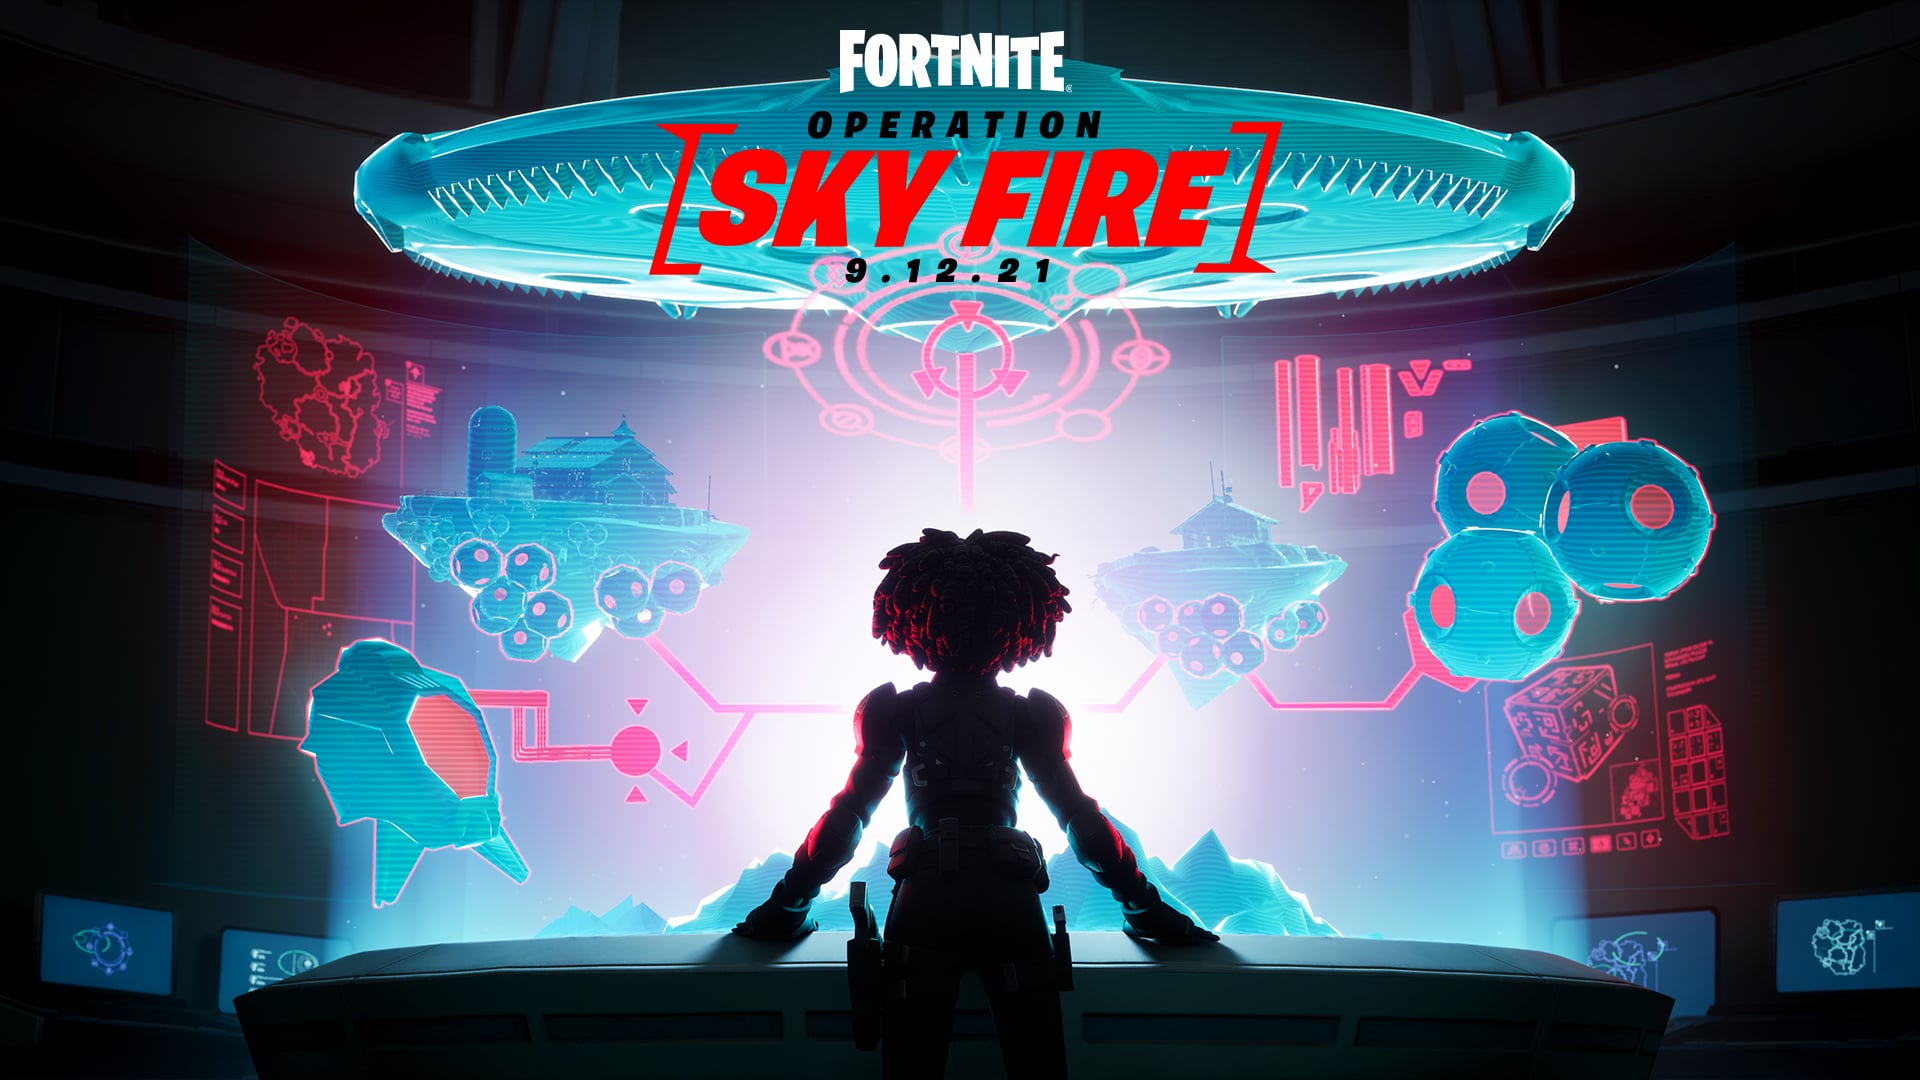 Fortnite Servers Down Why Is It Offline and What Is Operation Sky Fire?